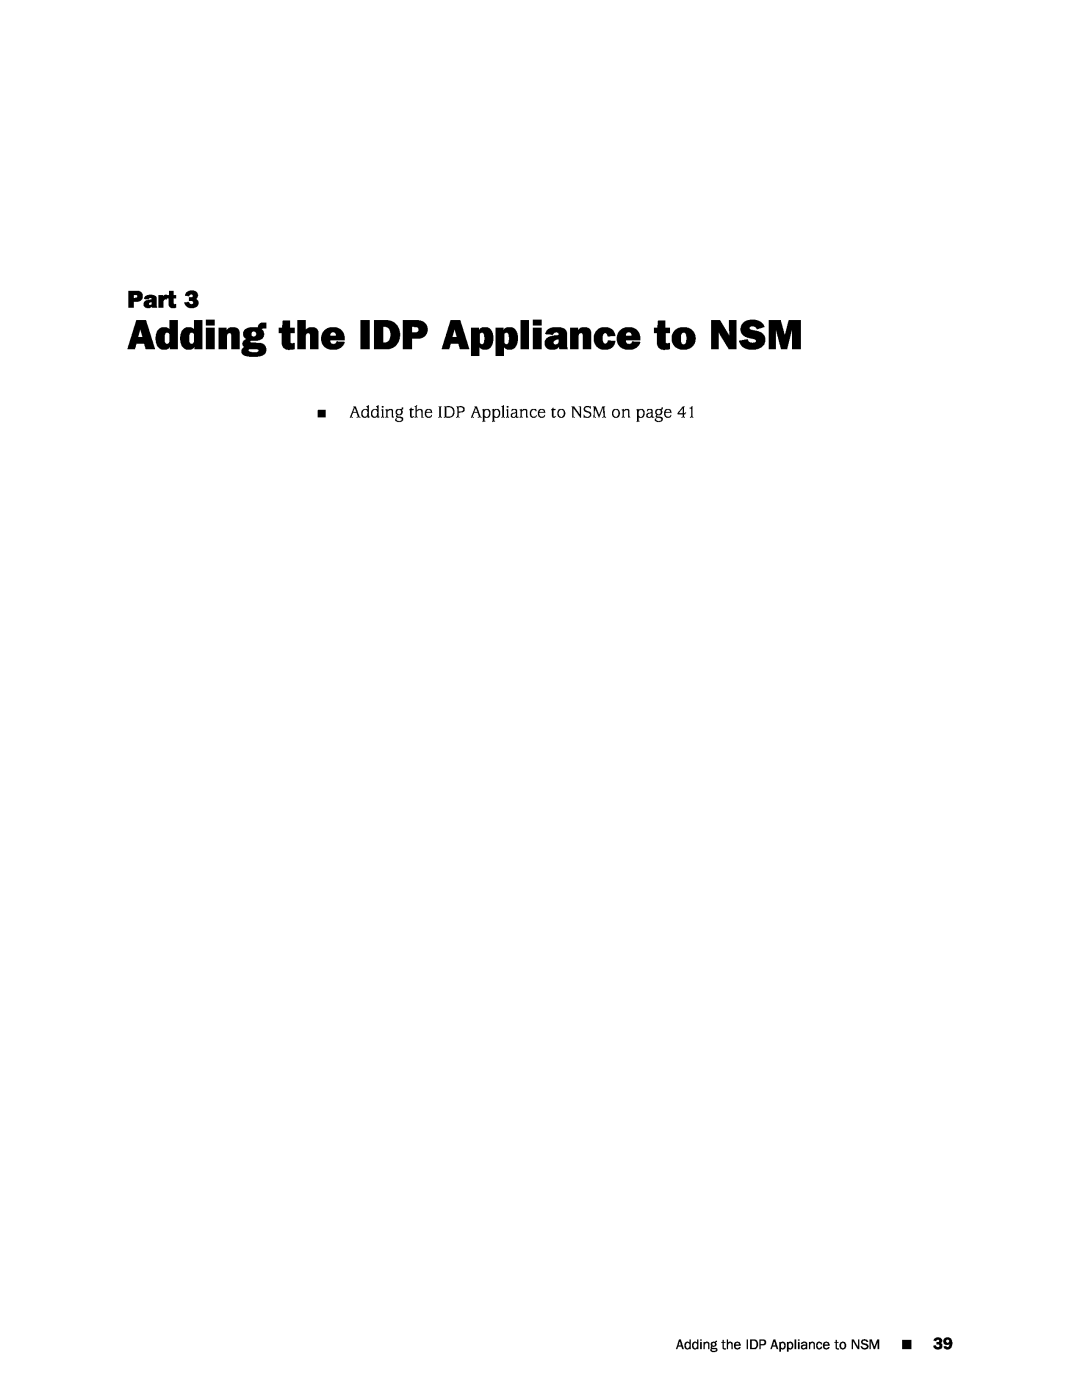 Juniper Networks IDP250 manual Part, Adding the IDP Appliance to NSM on page 